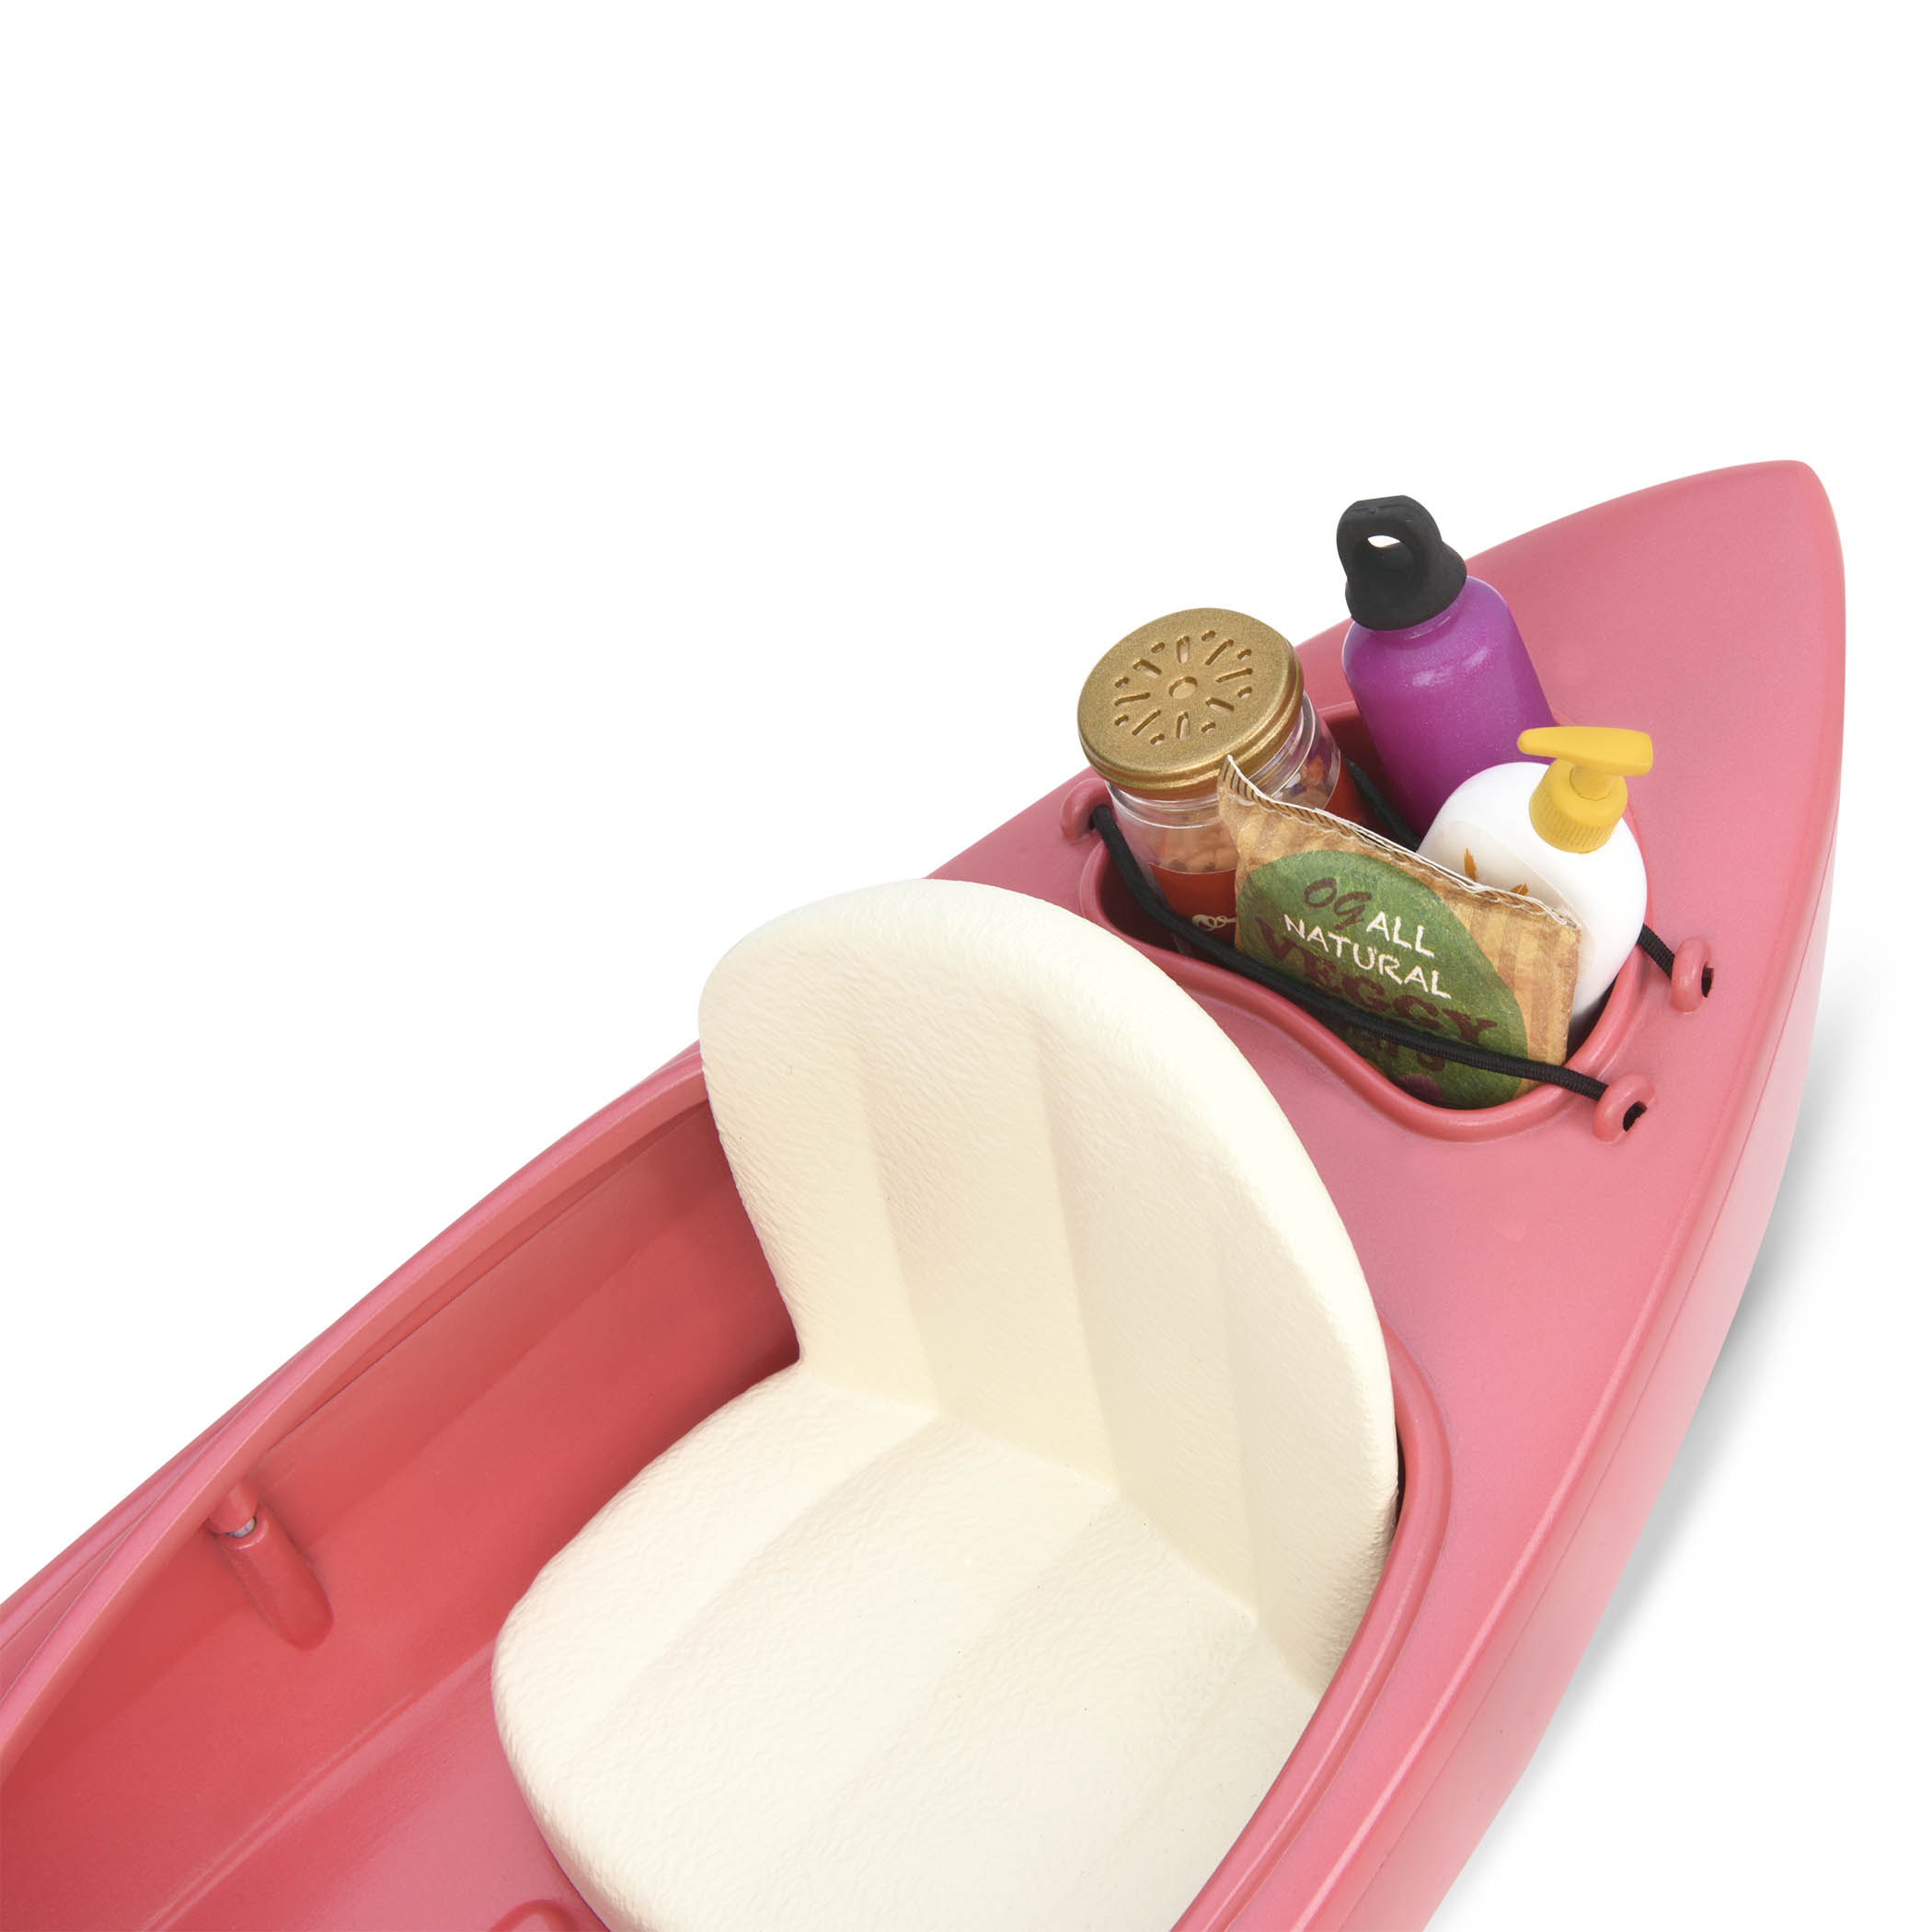 18-inch doll in kayak playset